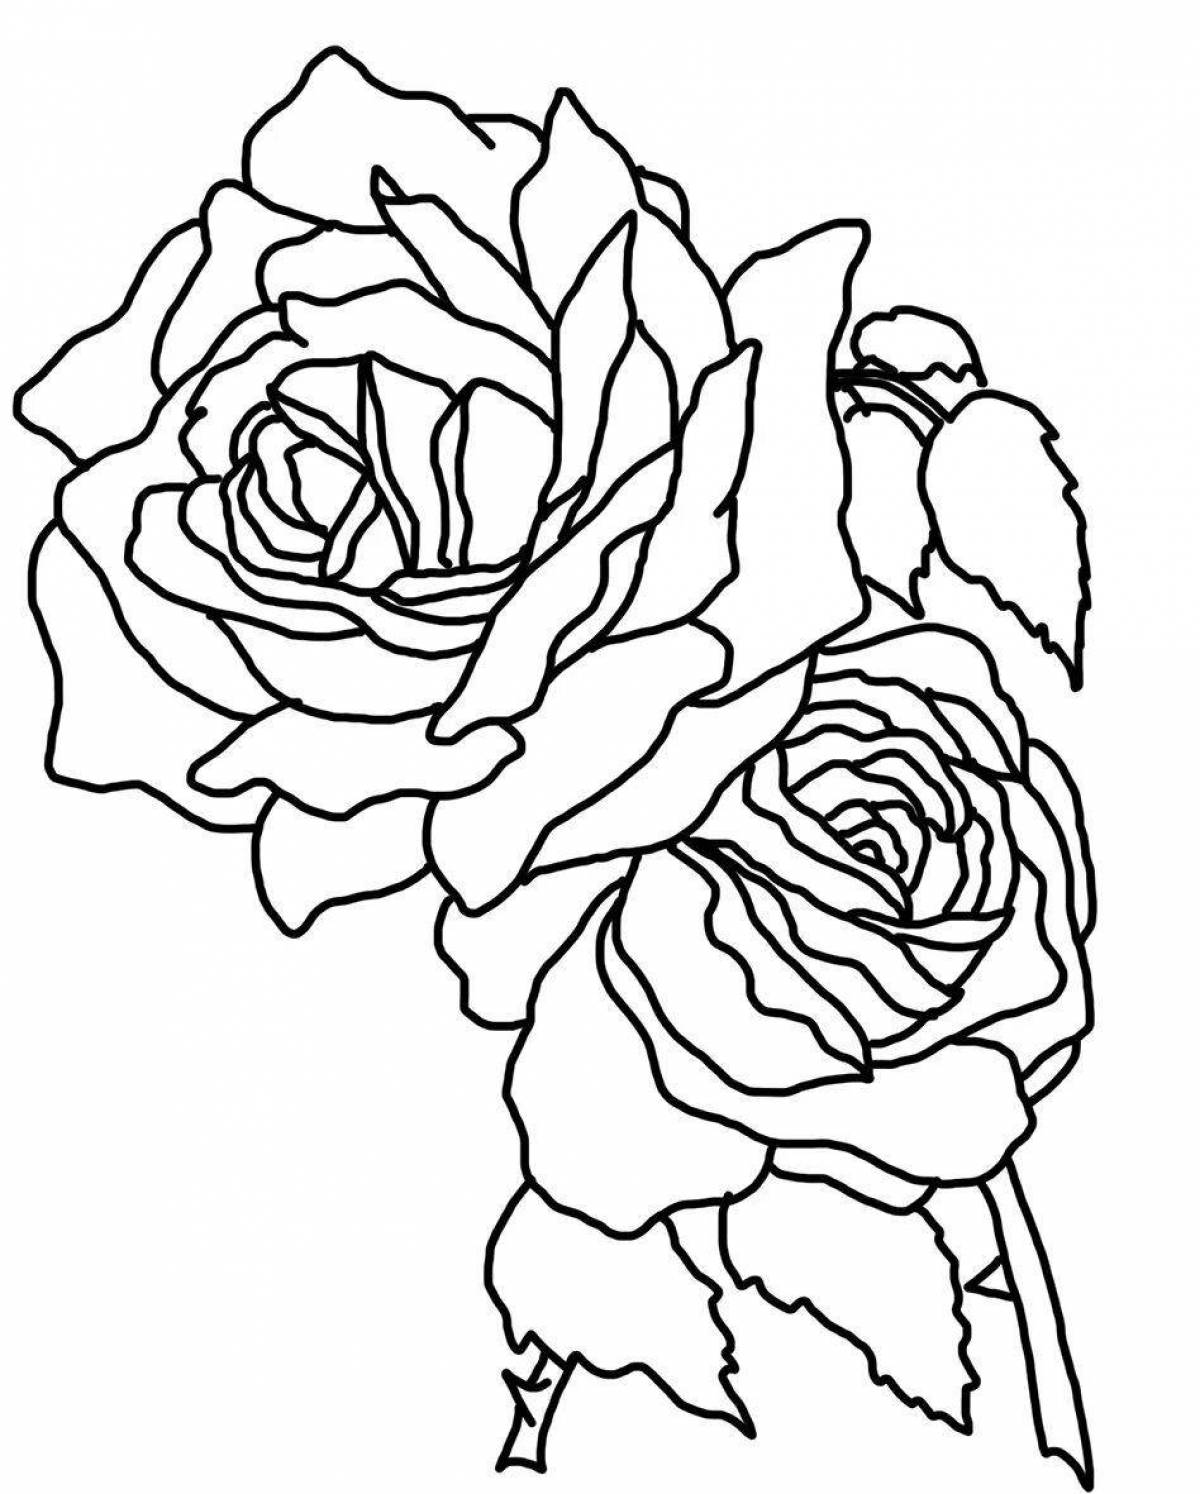 Complex coloring drawing of a rose